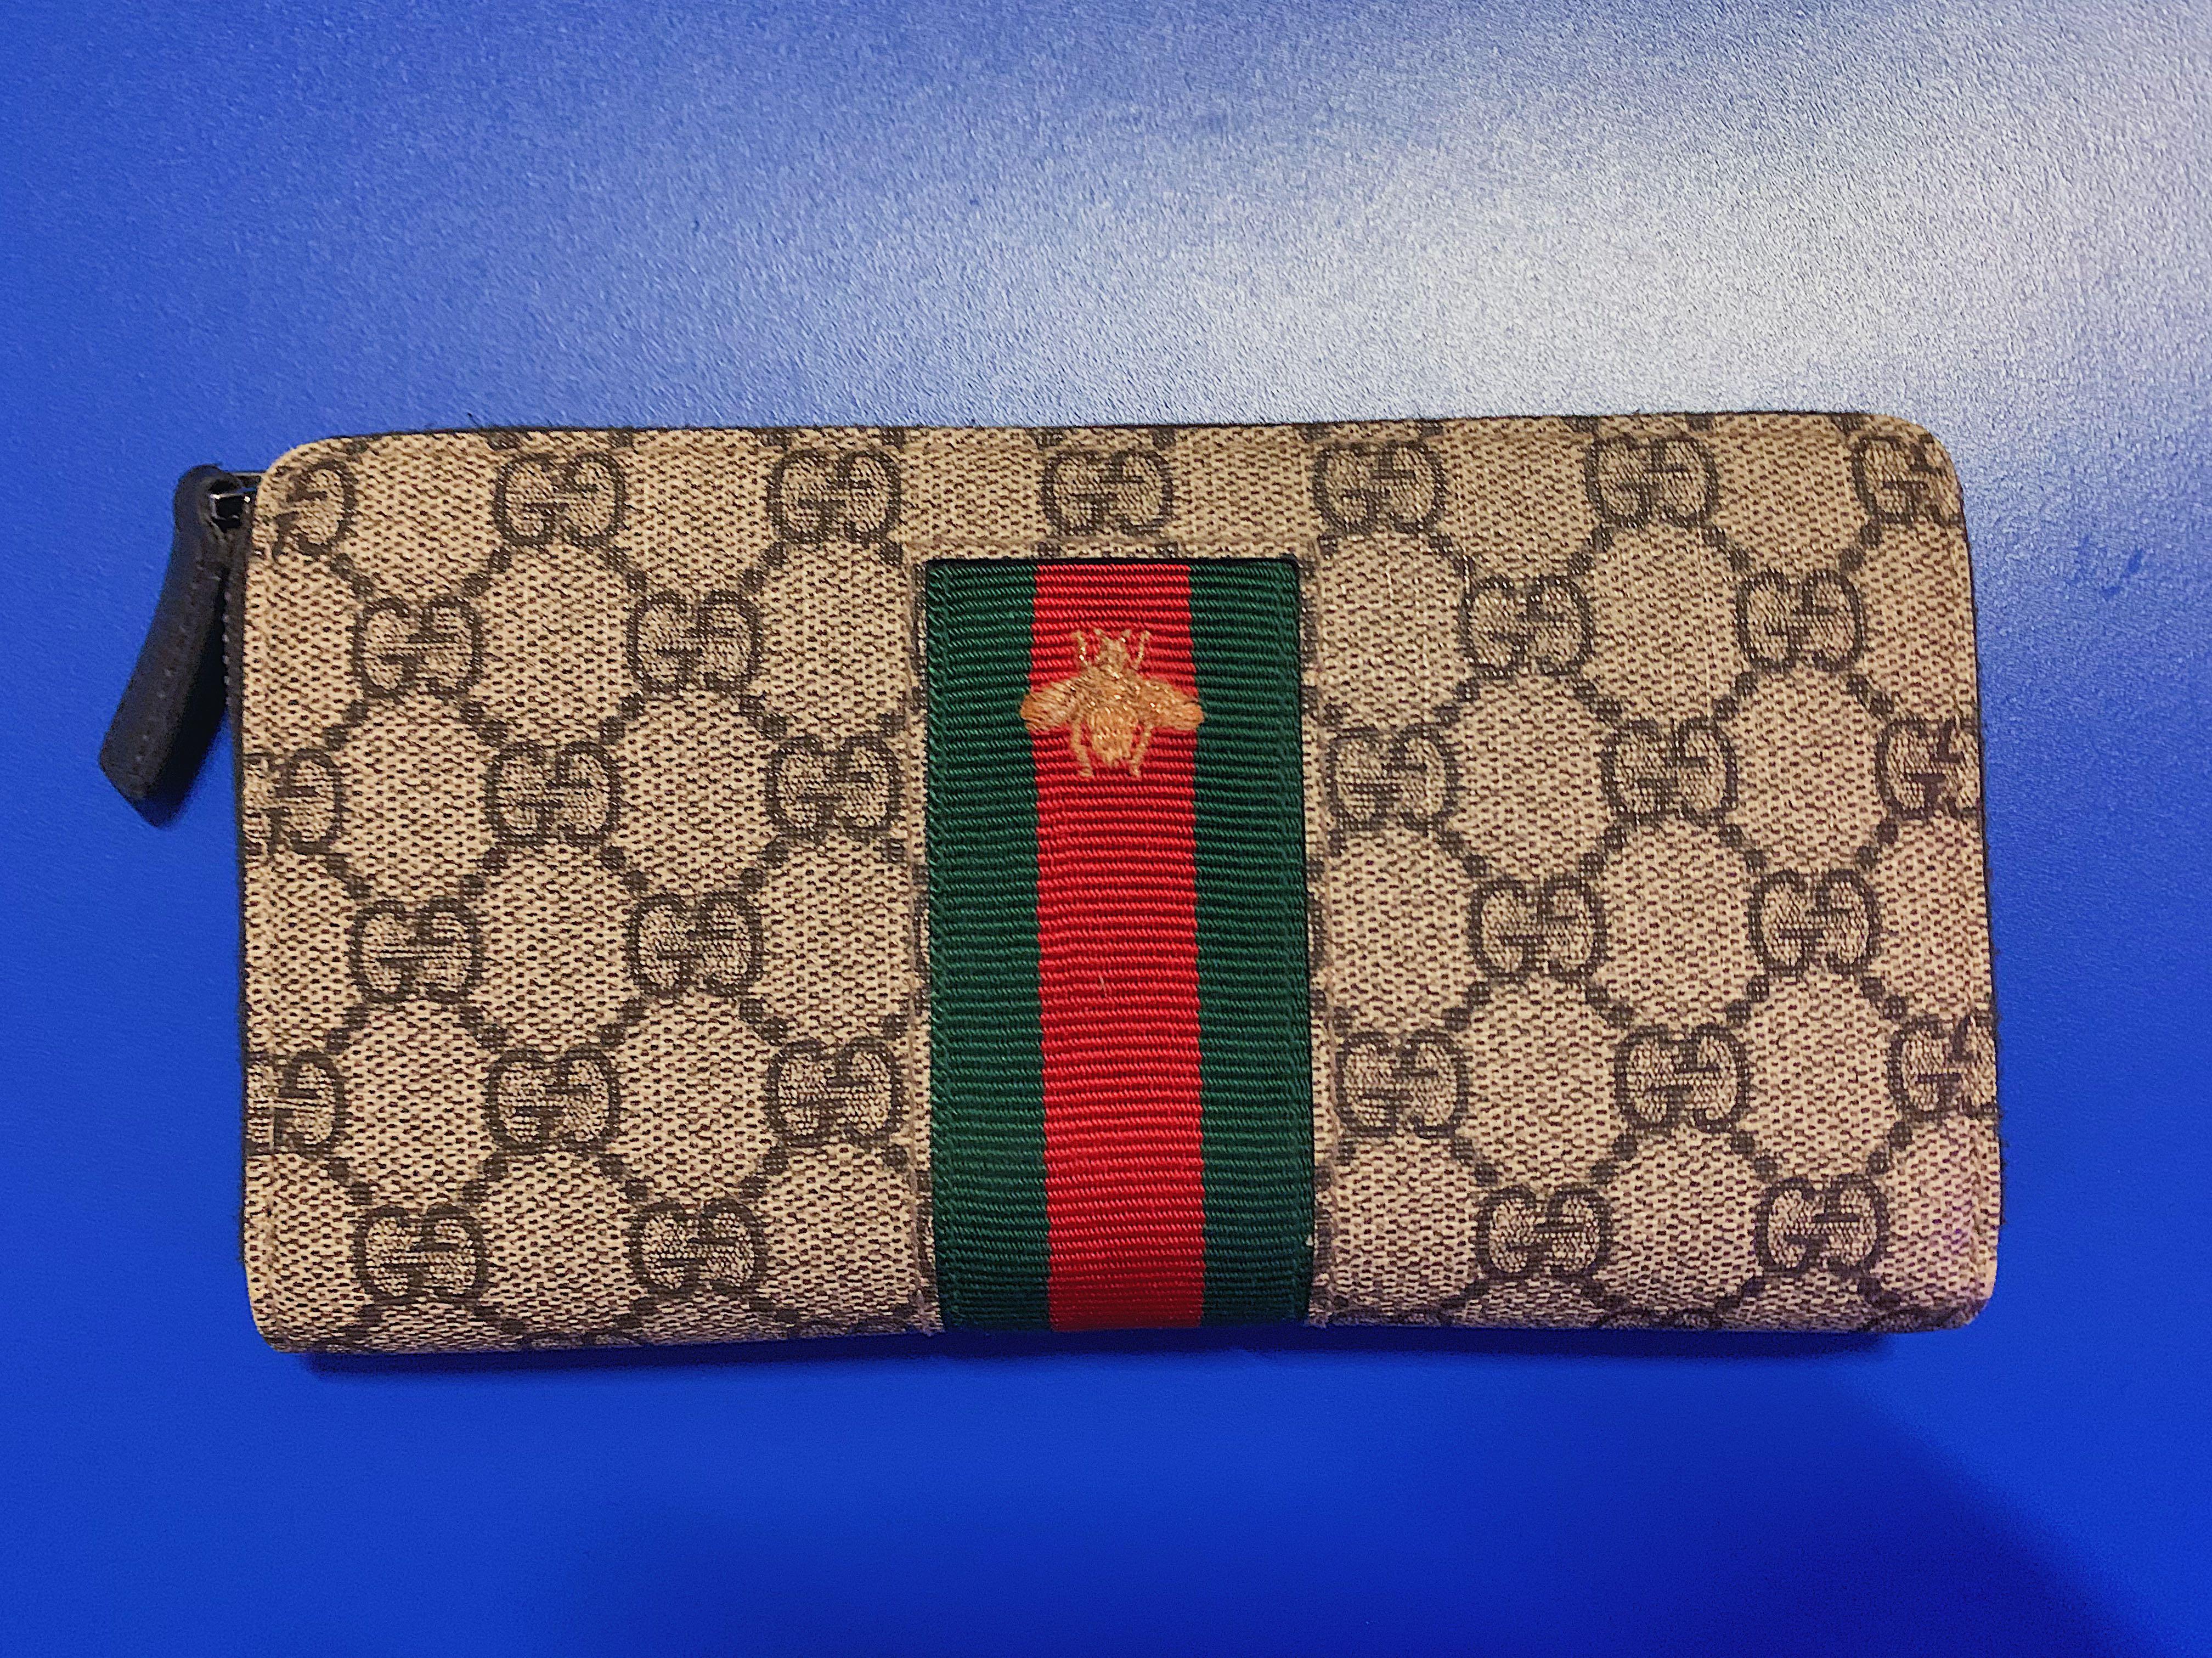 Gucci Bee Wallets for Women